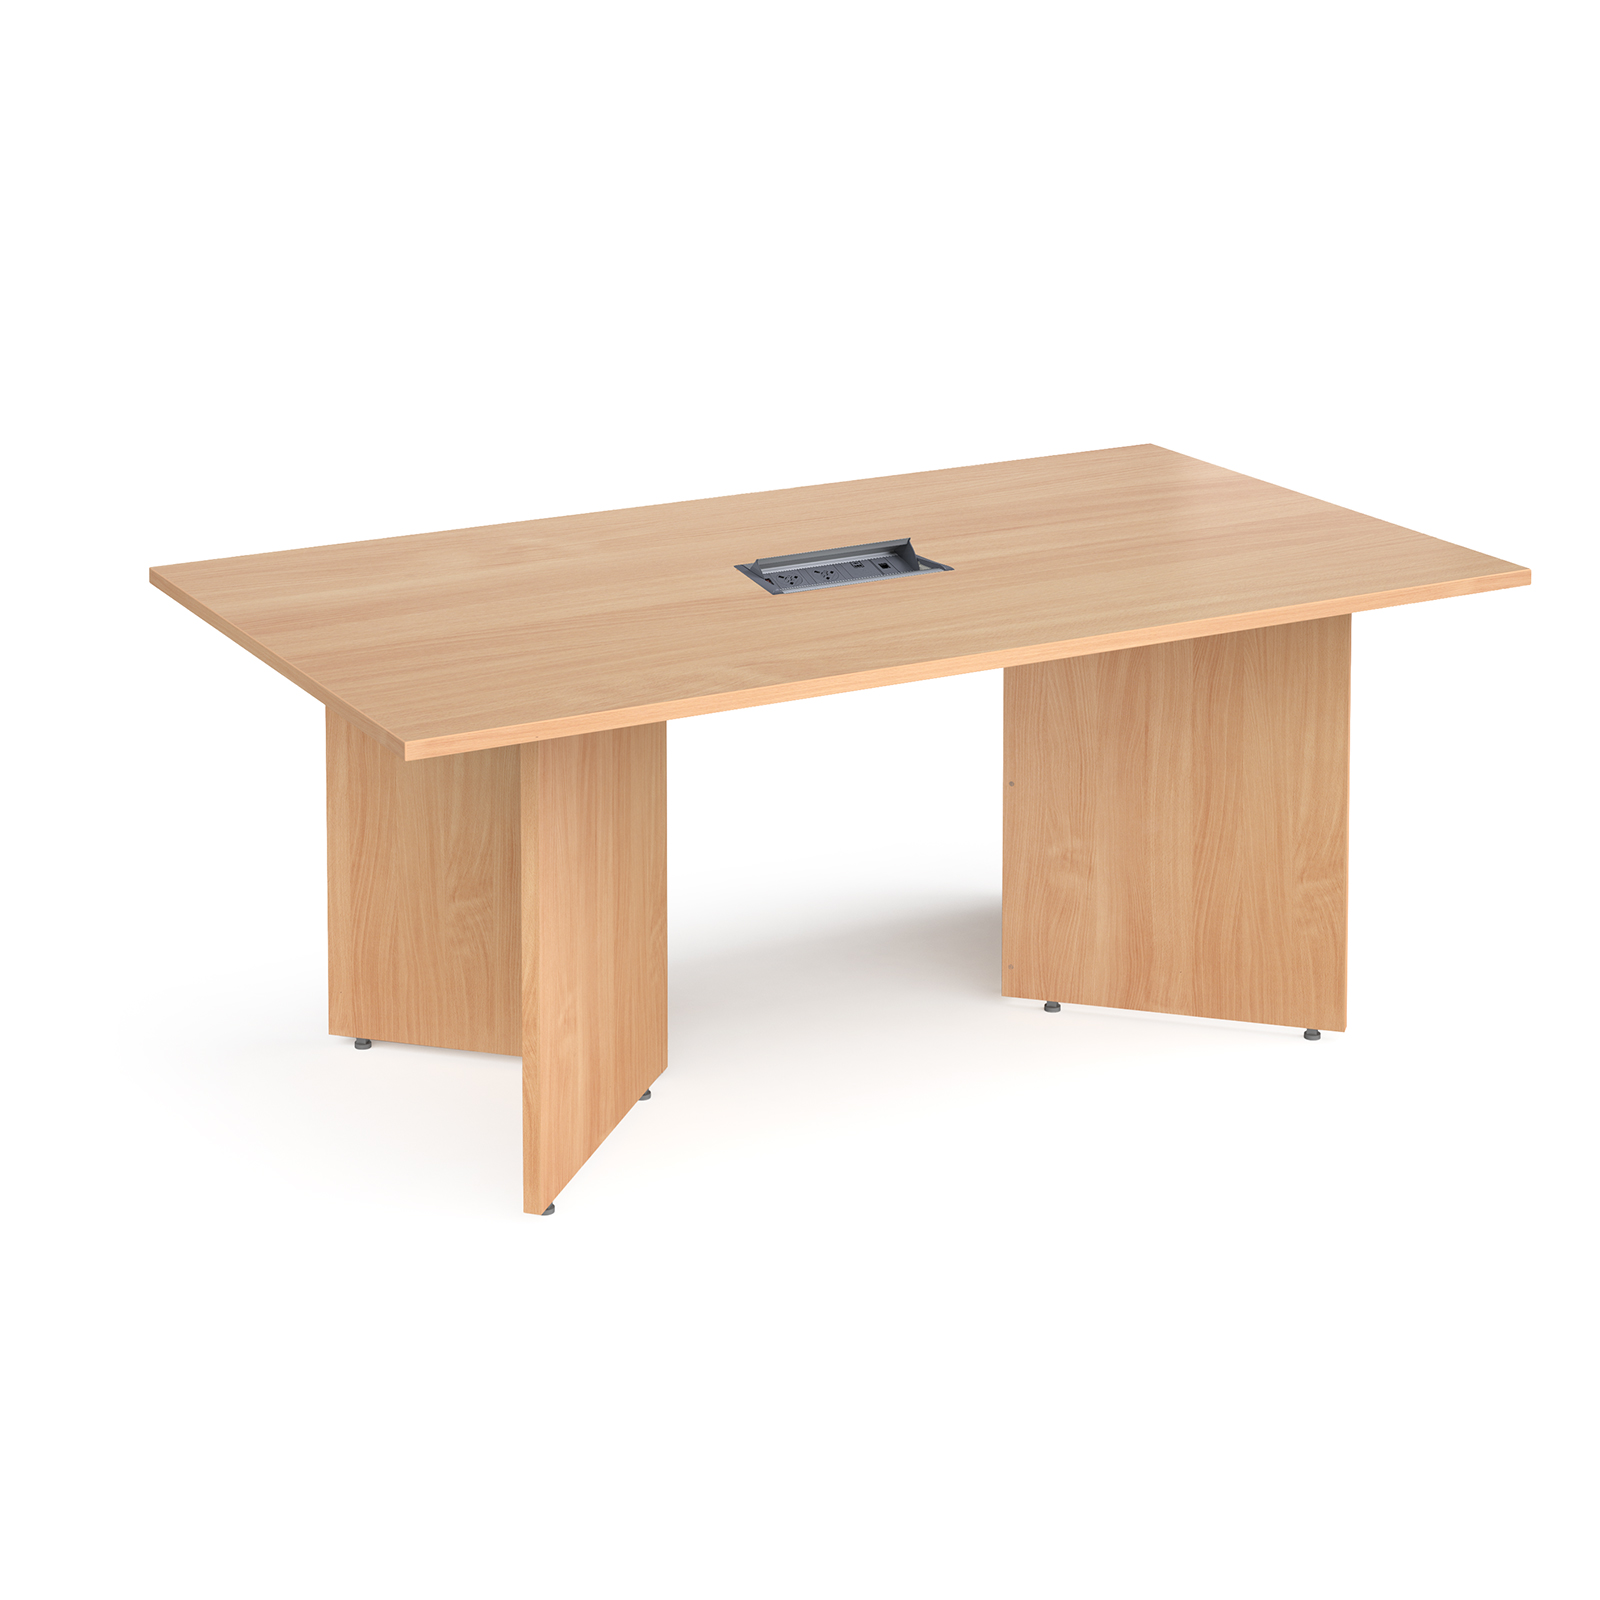 Arrow head leg rectangular boardroom table 1800mm x 1000mm in beech with central cutout and Aero power module